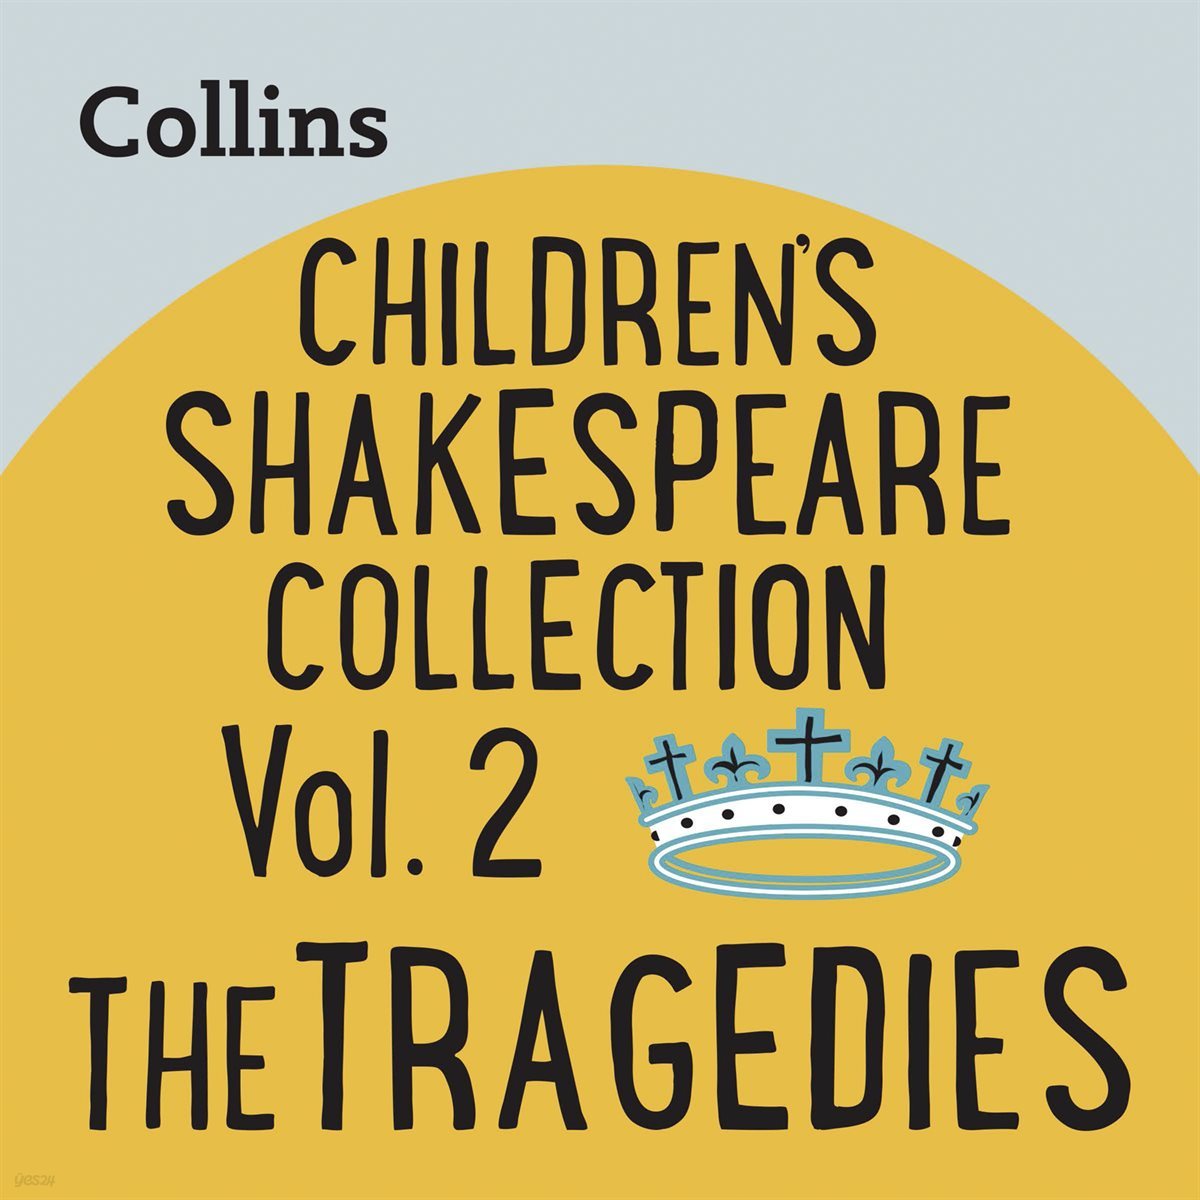 [UK Eng] CHILDREN’S SHAKESPEARE COLLECTION VOL.2: THE TRAGEDIES: For ages 7-11 -Collins